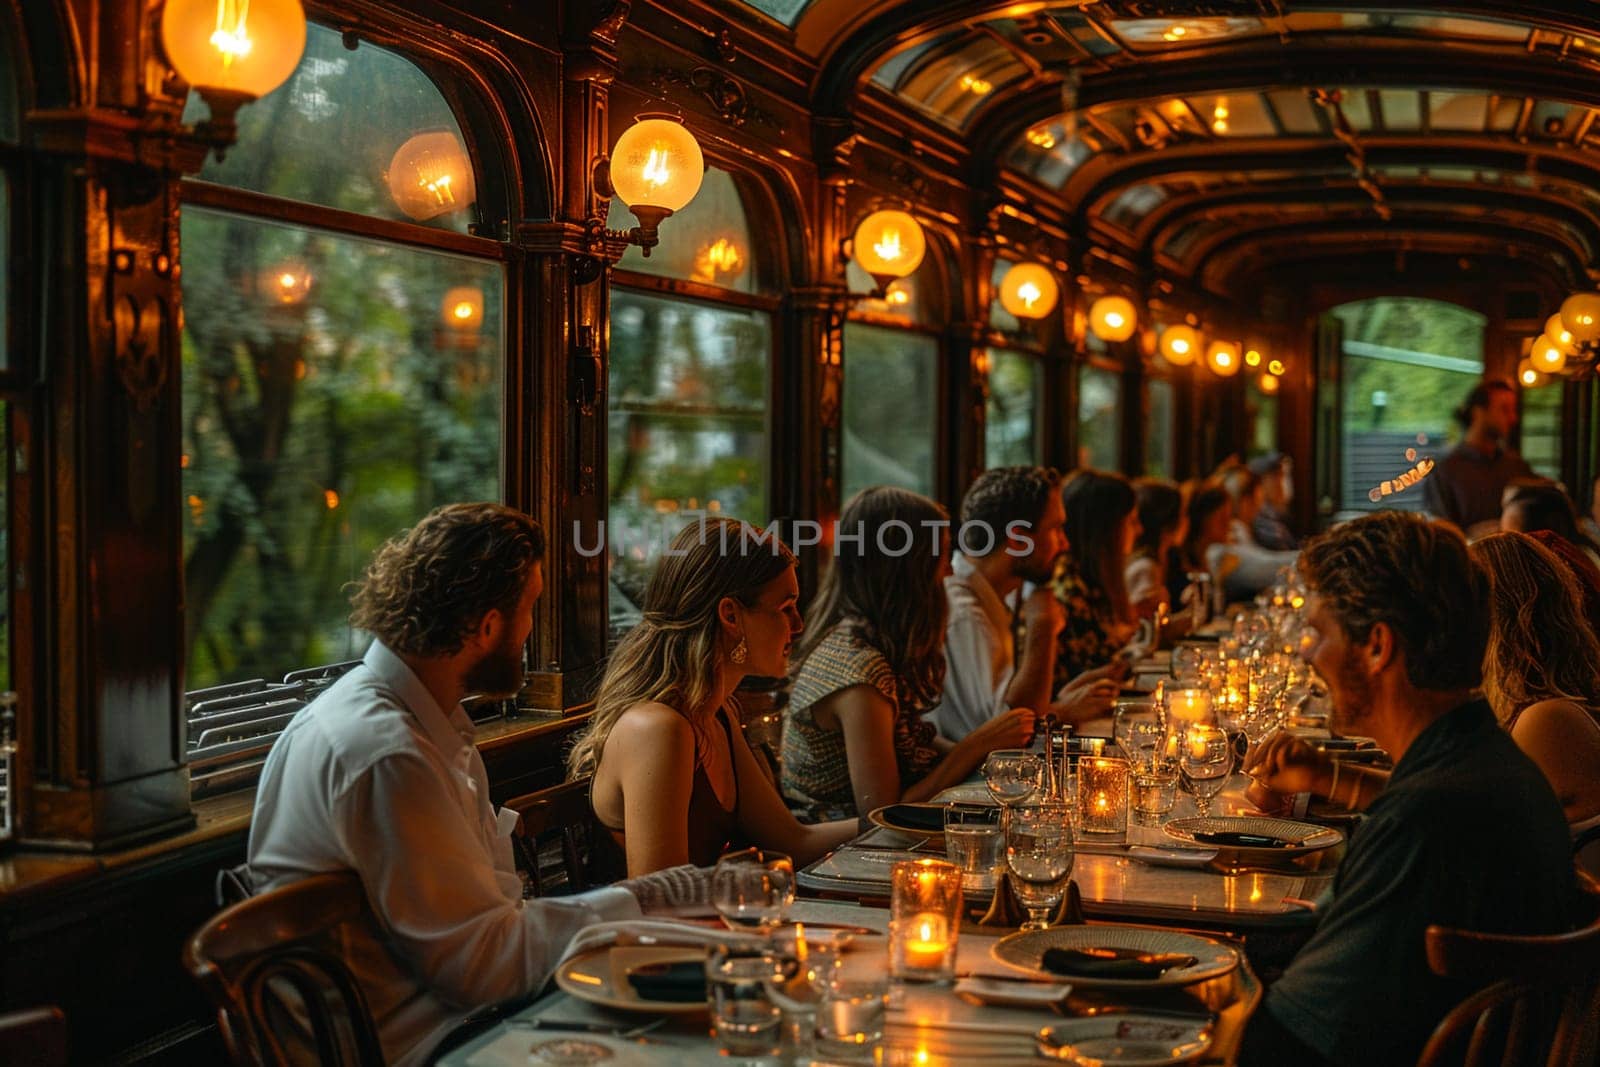 Vintage train car dining experience with period details and intimate seating